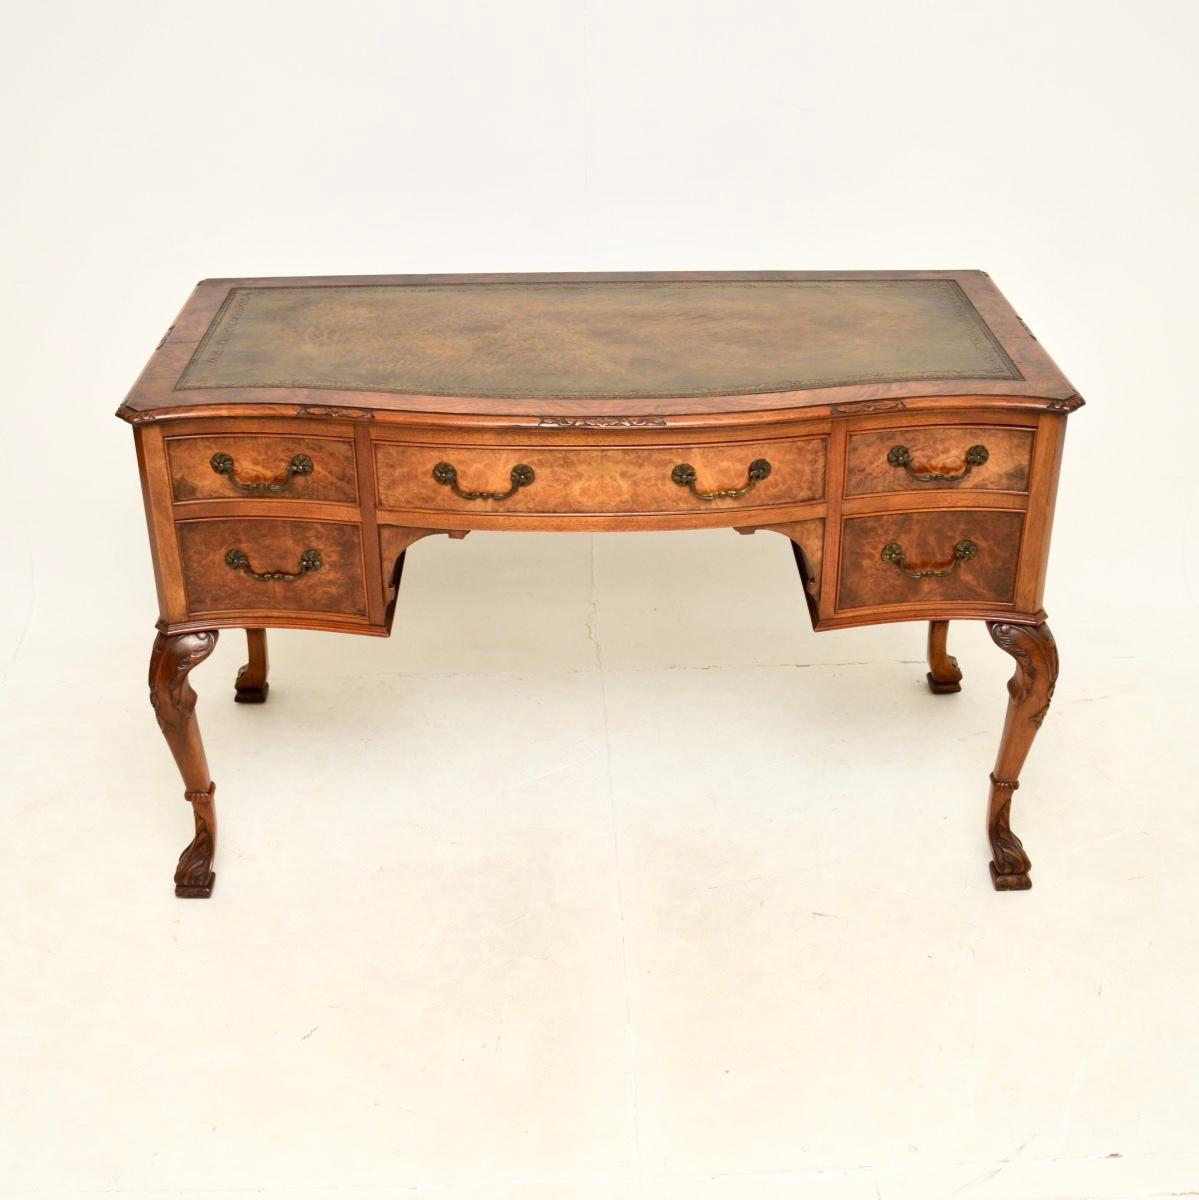 An impressive and extremely well made antique burr walnut leather top desk. This was made in England, it dates from around the 1900-20 period.

The quality is outstanding, this has stunning burr walnut grain patterns and crisp carving on the